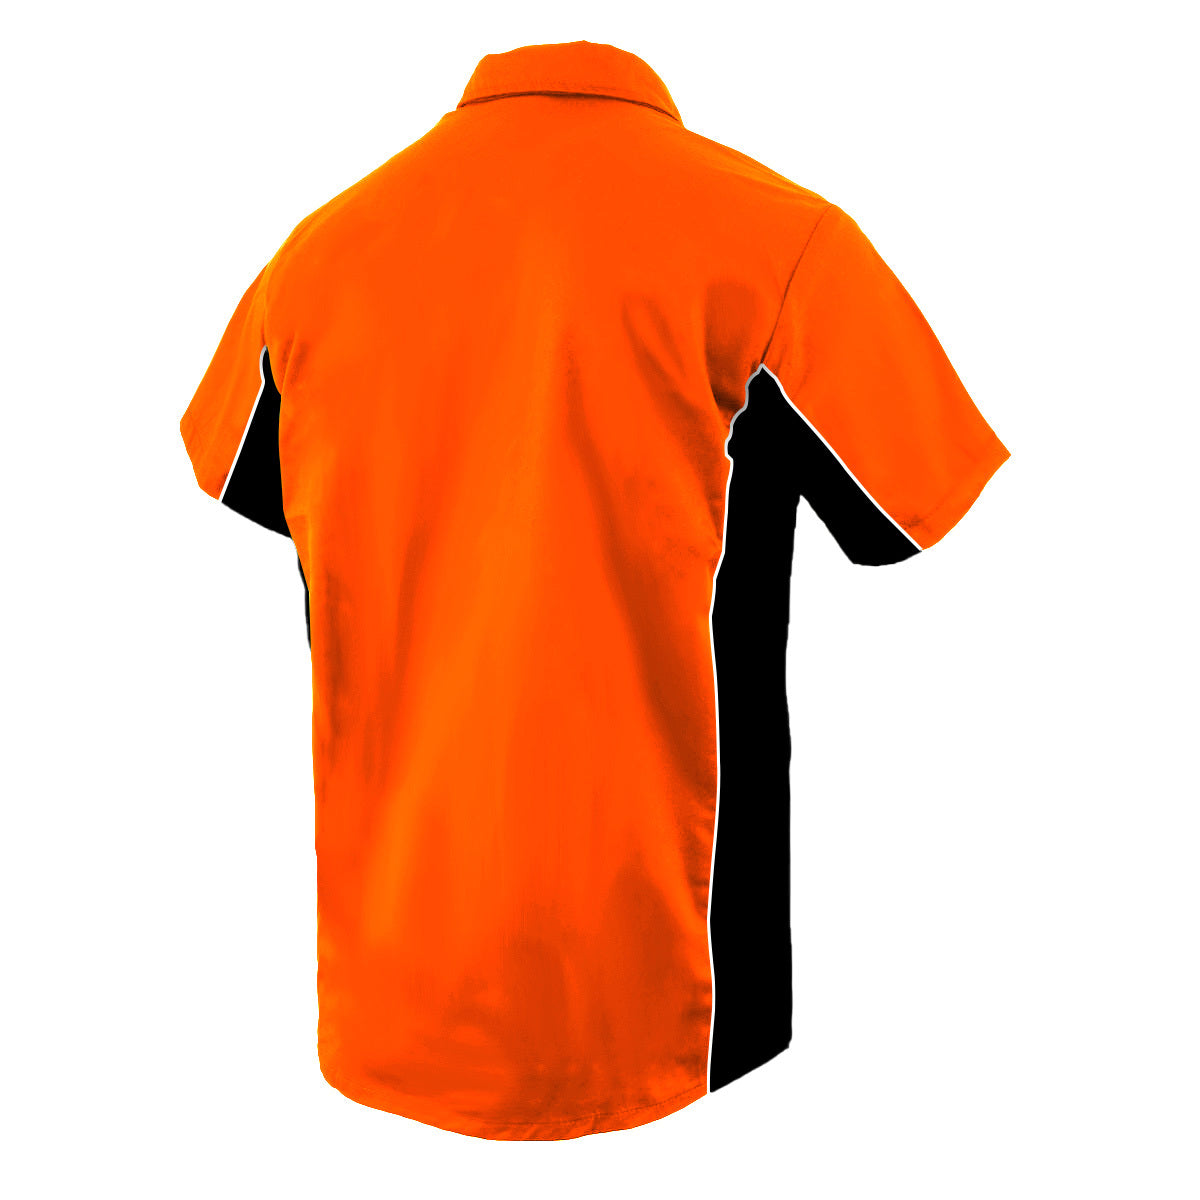 Men's Work Shirts in Various Color Patterns